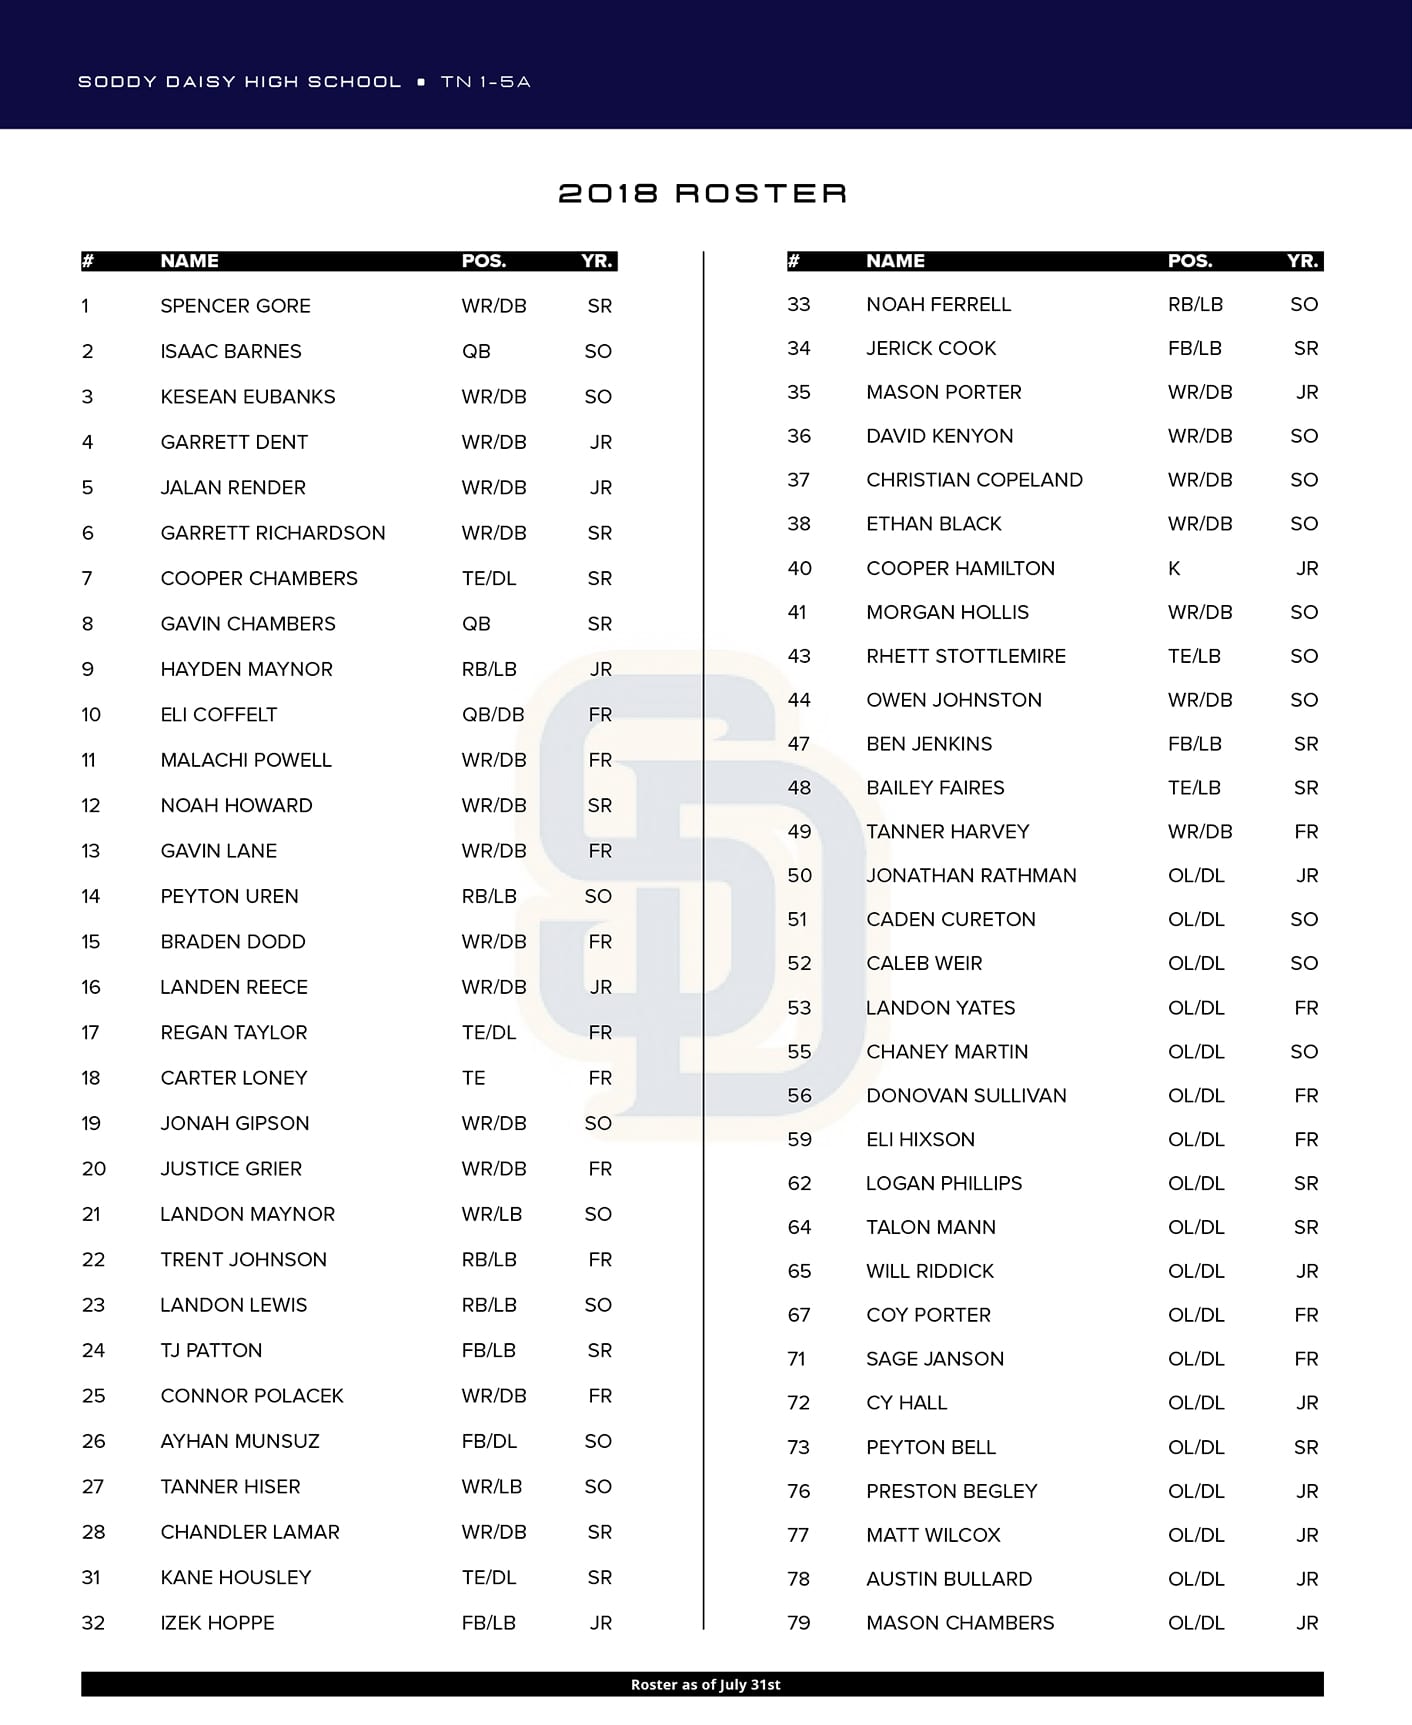 Soddy daisy High School Football 2018 Roster in chattanooga